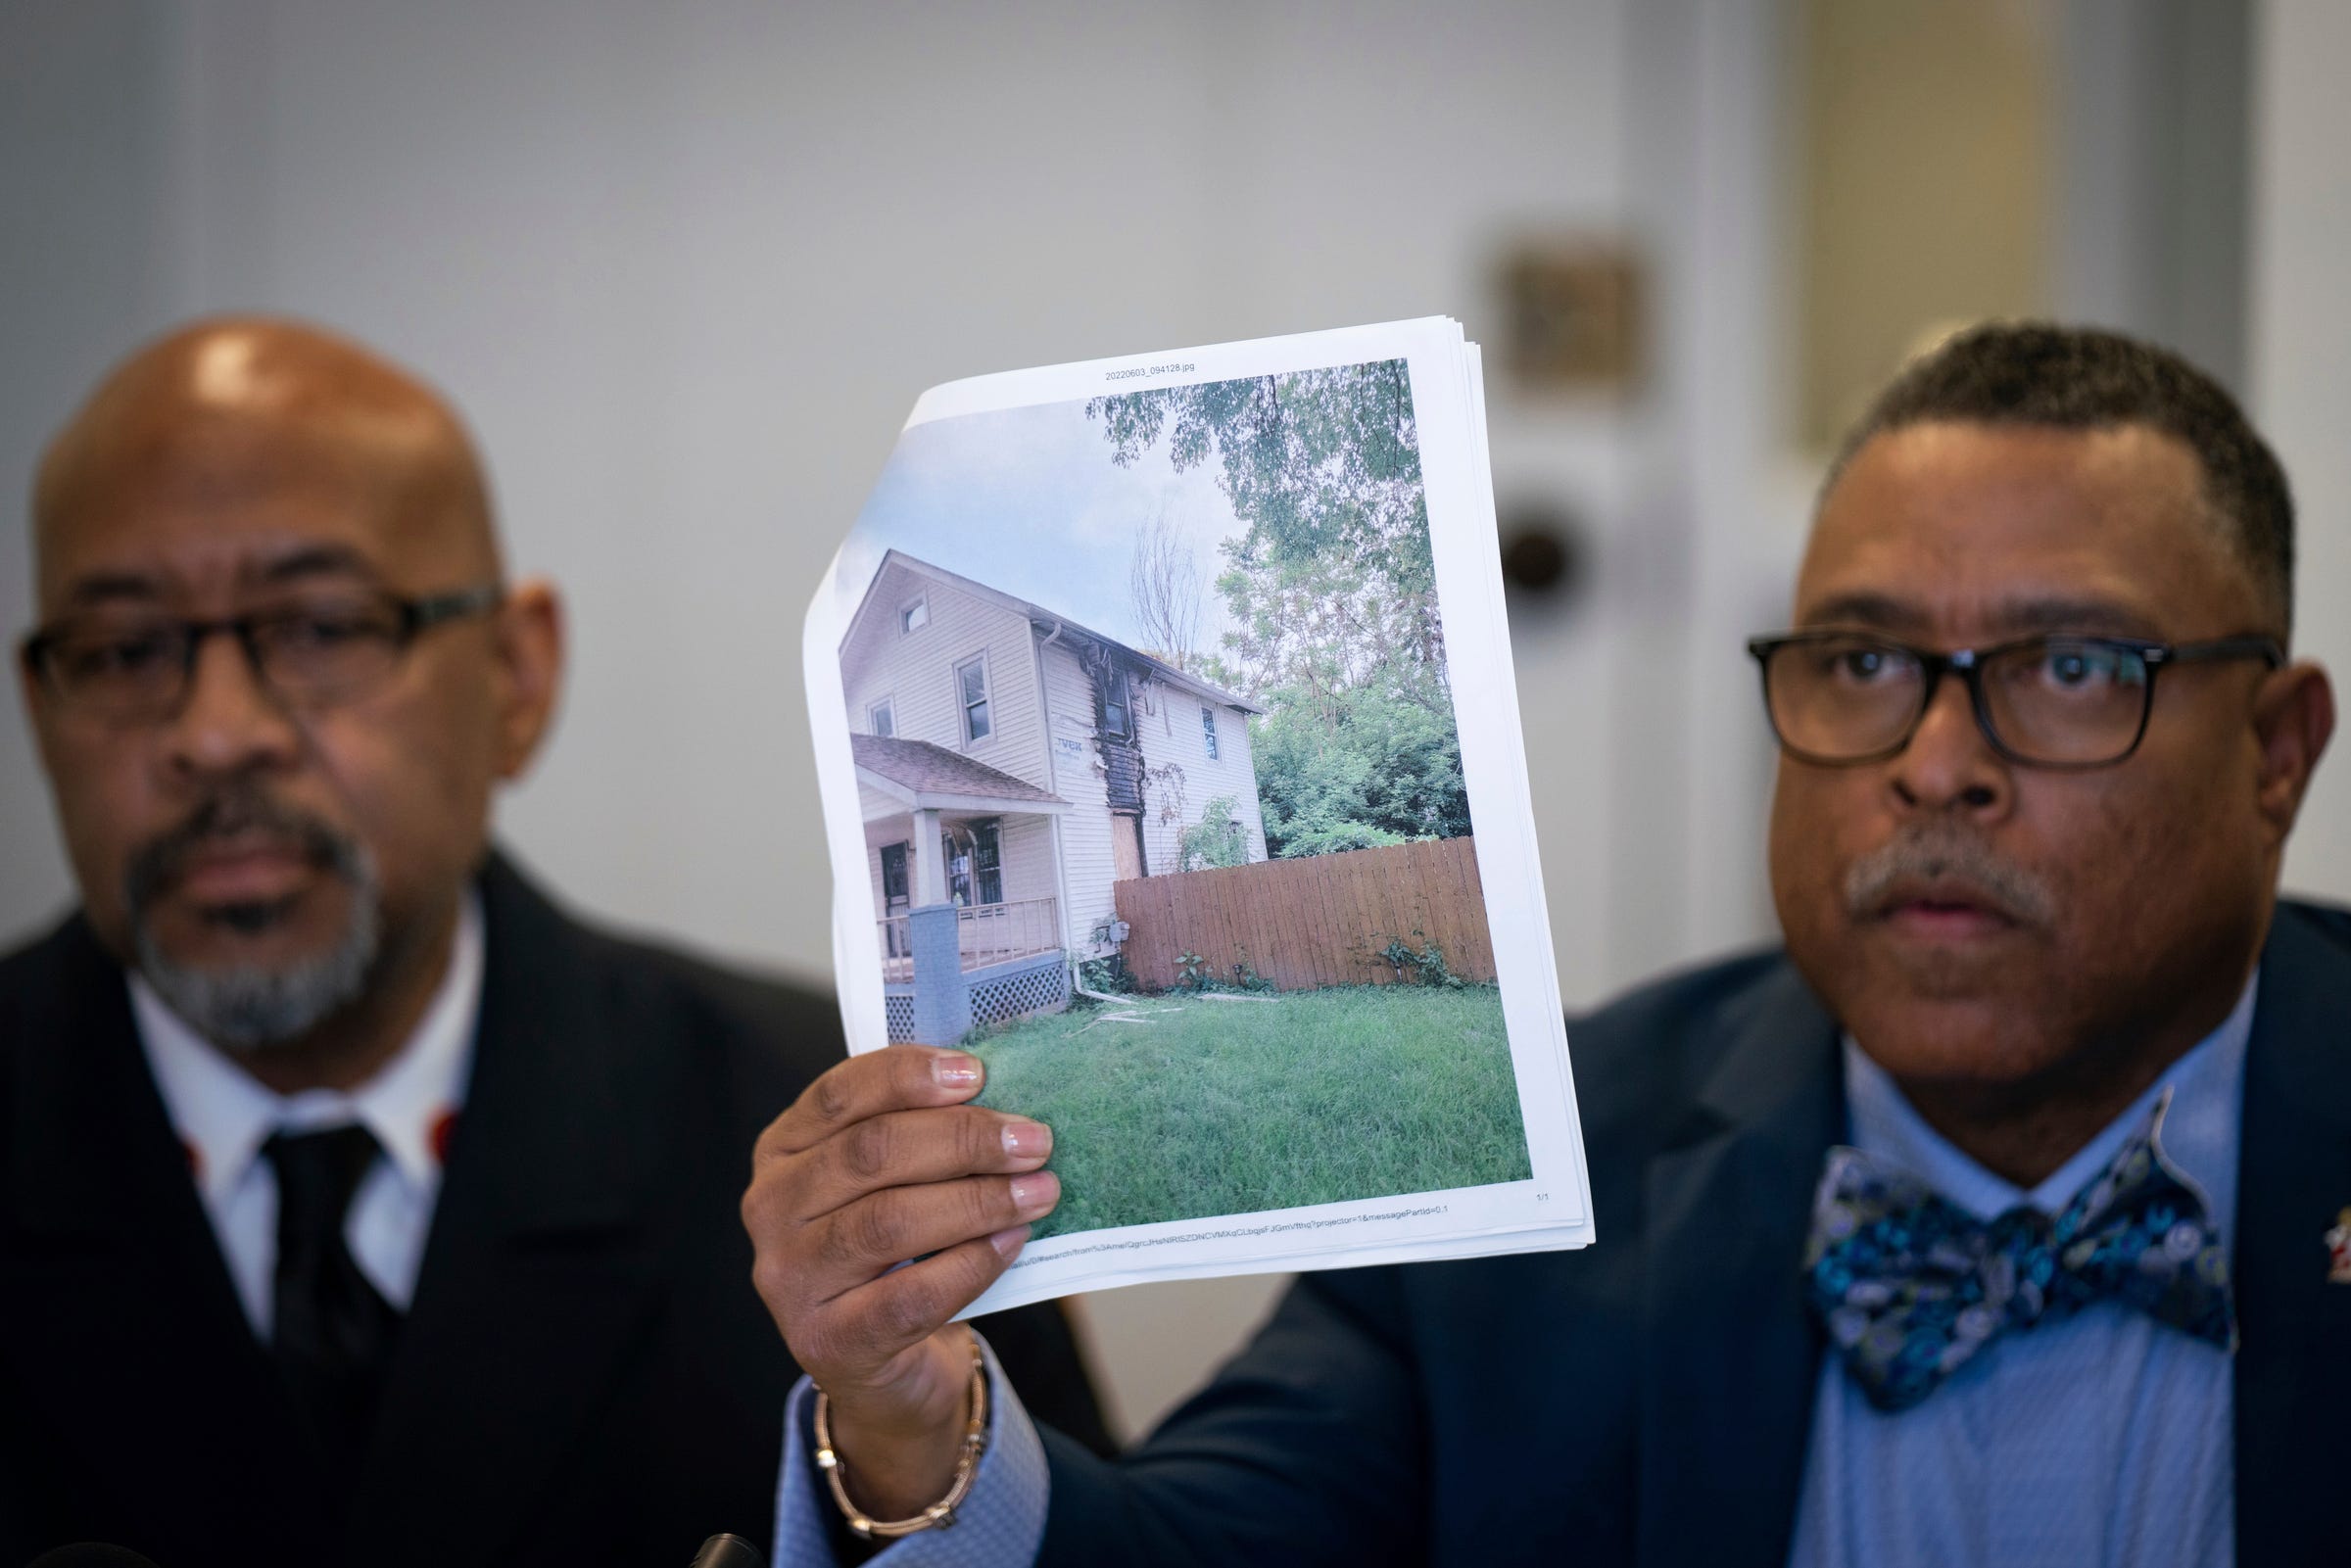 Attorney Arnold Reed, right, shows a photograph of a Flint home that caught fire in May 2022, while flanked by Former Flint Fire Chief Raymond Barton during a press conference at the Arnold E. Reed & Associates, P.C. in Southfield on Monday, Jan. 9, 2023. Two brothers, Zyaire Mitchell, 12, and Lamar Mitchell, 9, died of smoke inhalation from the house fire.